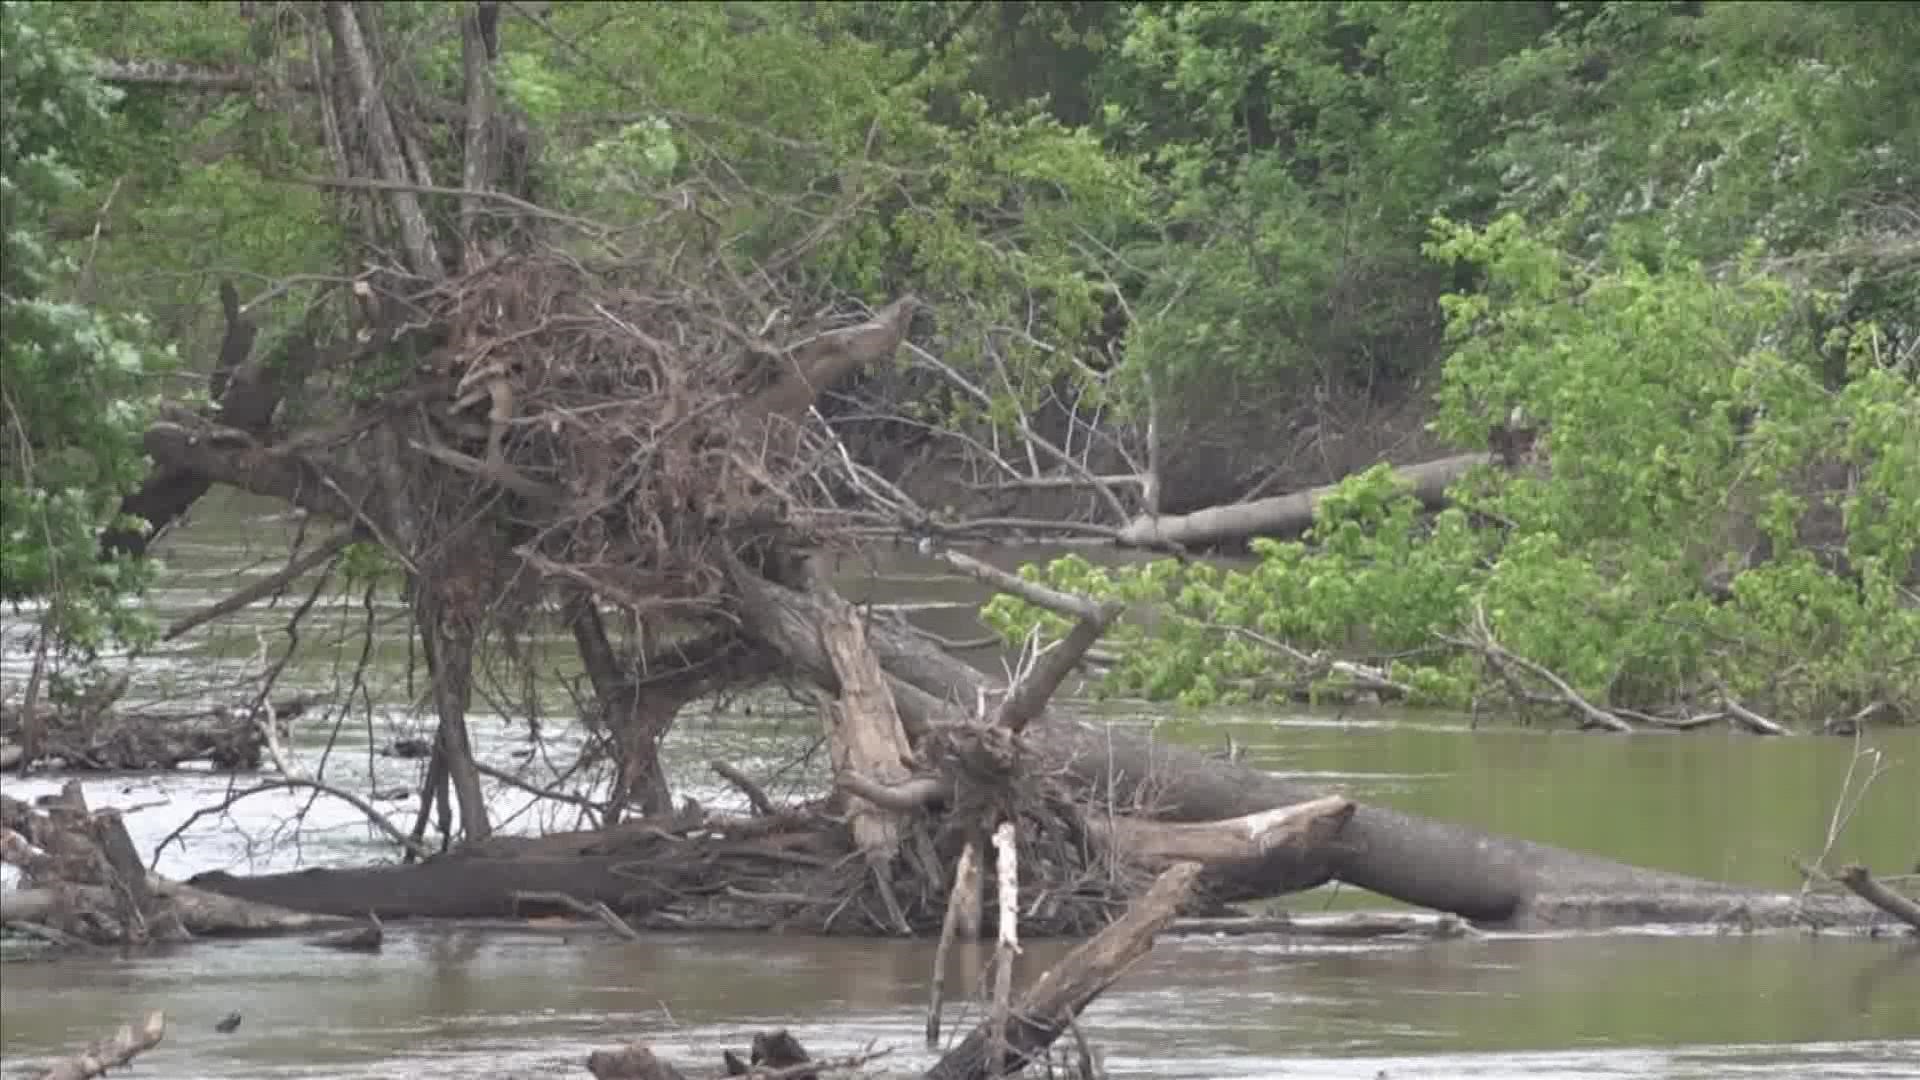 The Shelby County Sheriff's Office said they first got a report that someone may have drowned in the Wolf River Sunday, May 1.